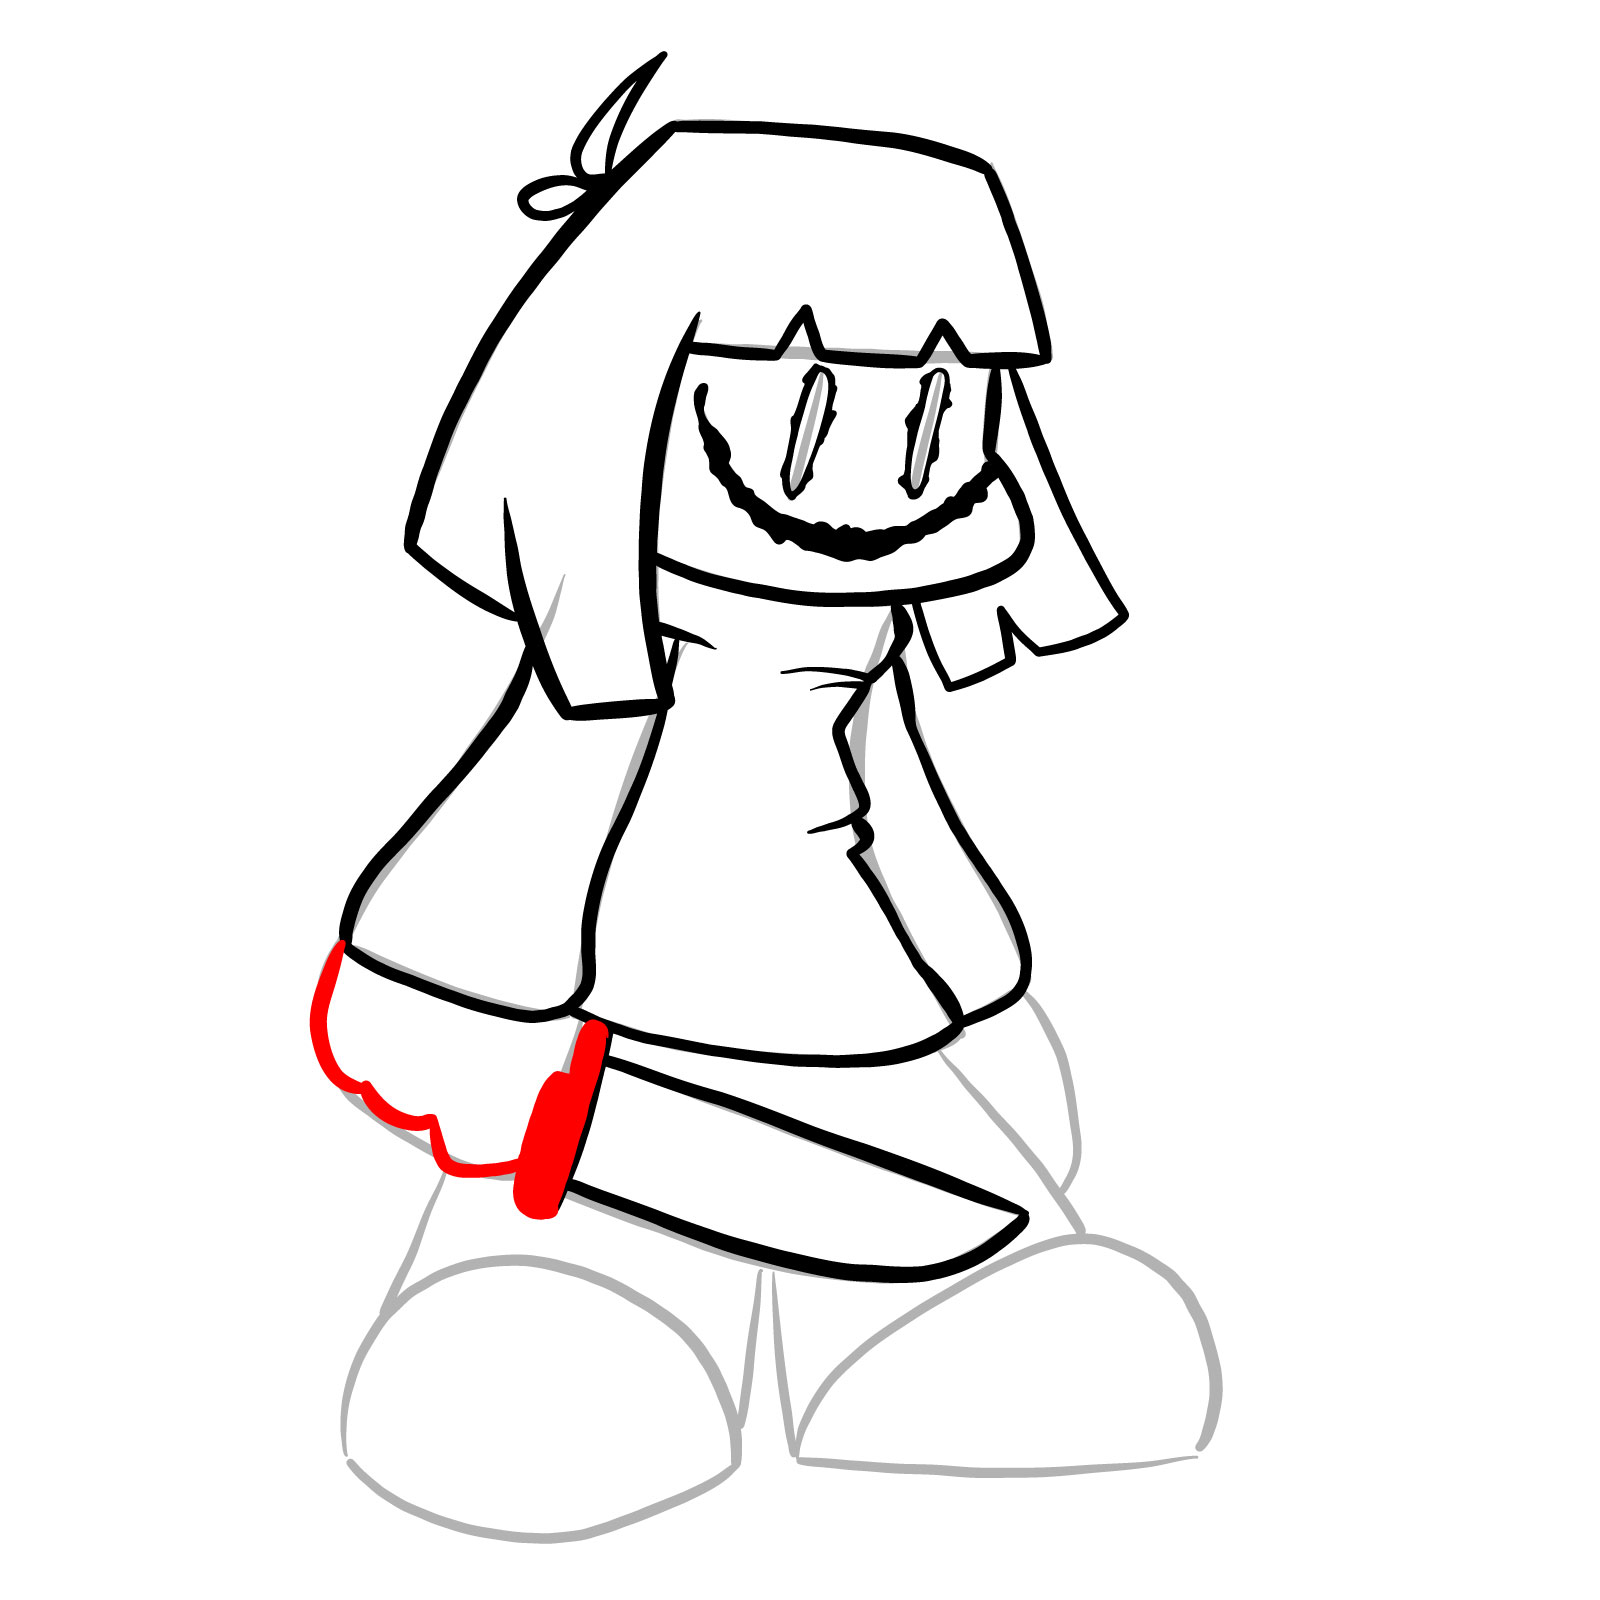 How to draw Chara from Friday Night Dustin' - step 16